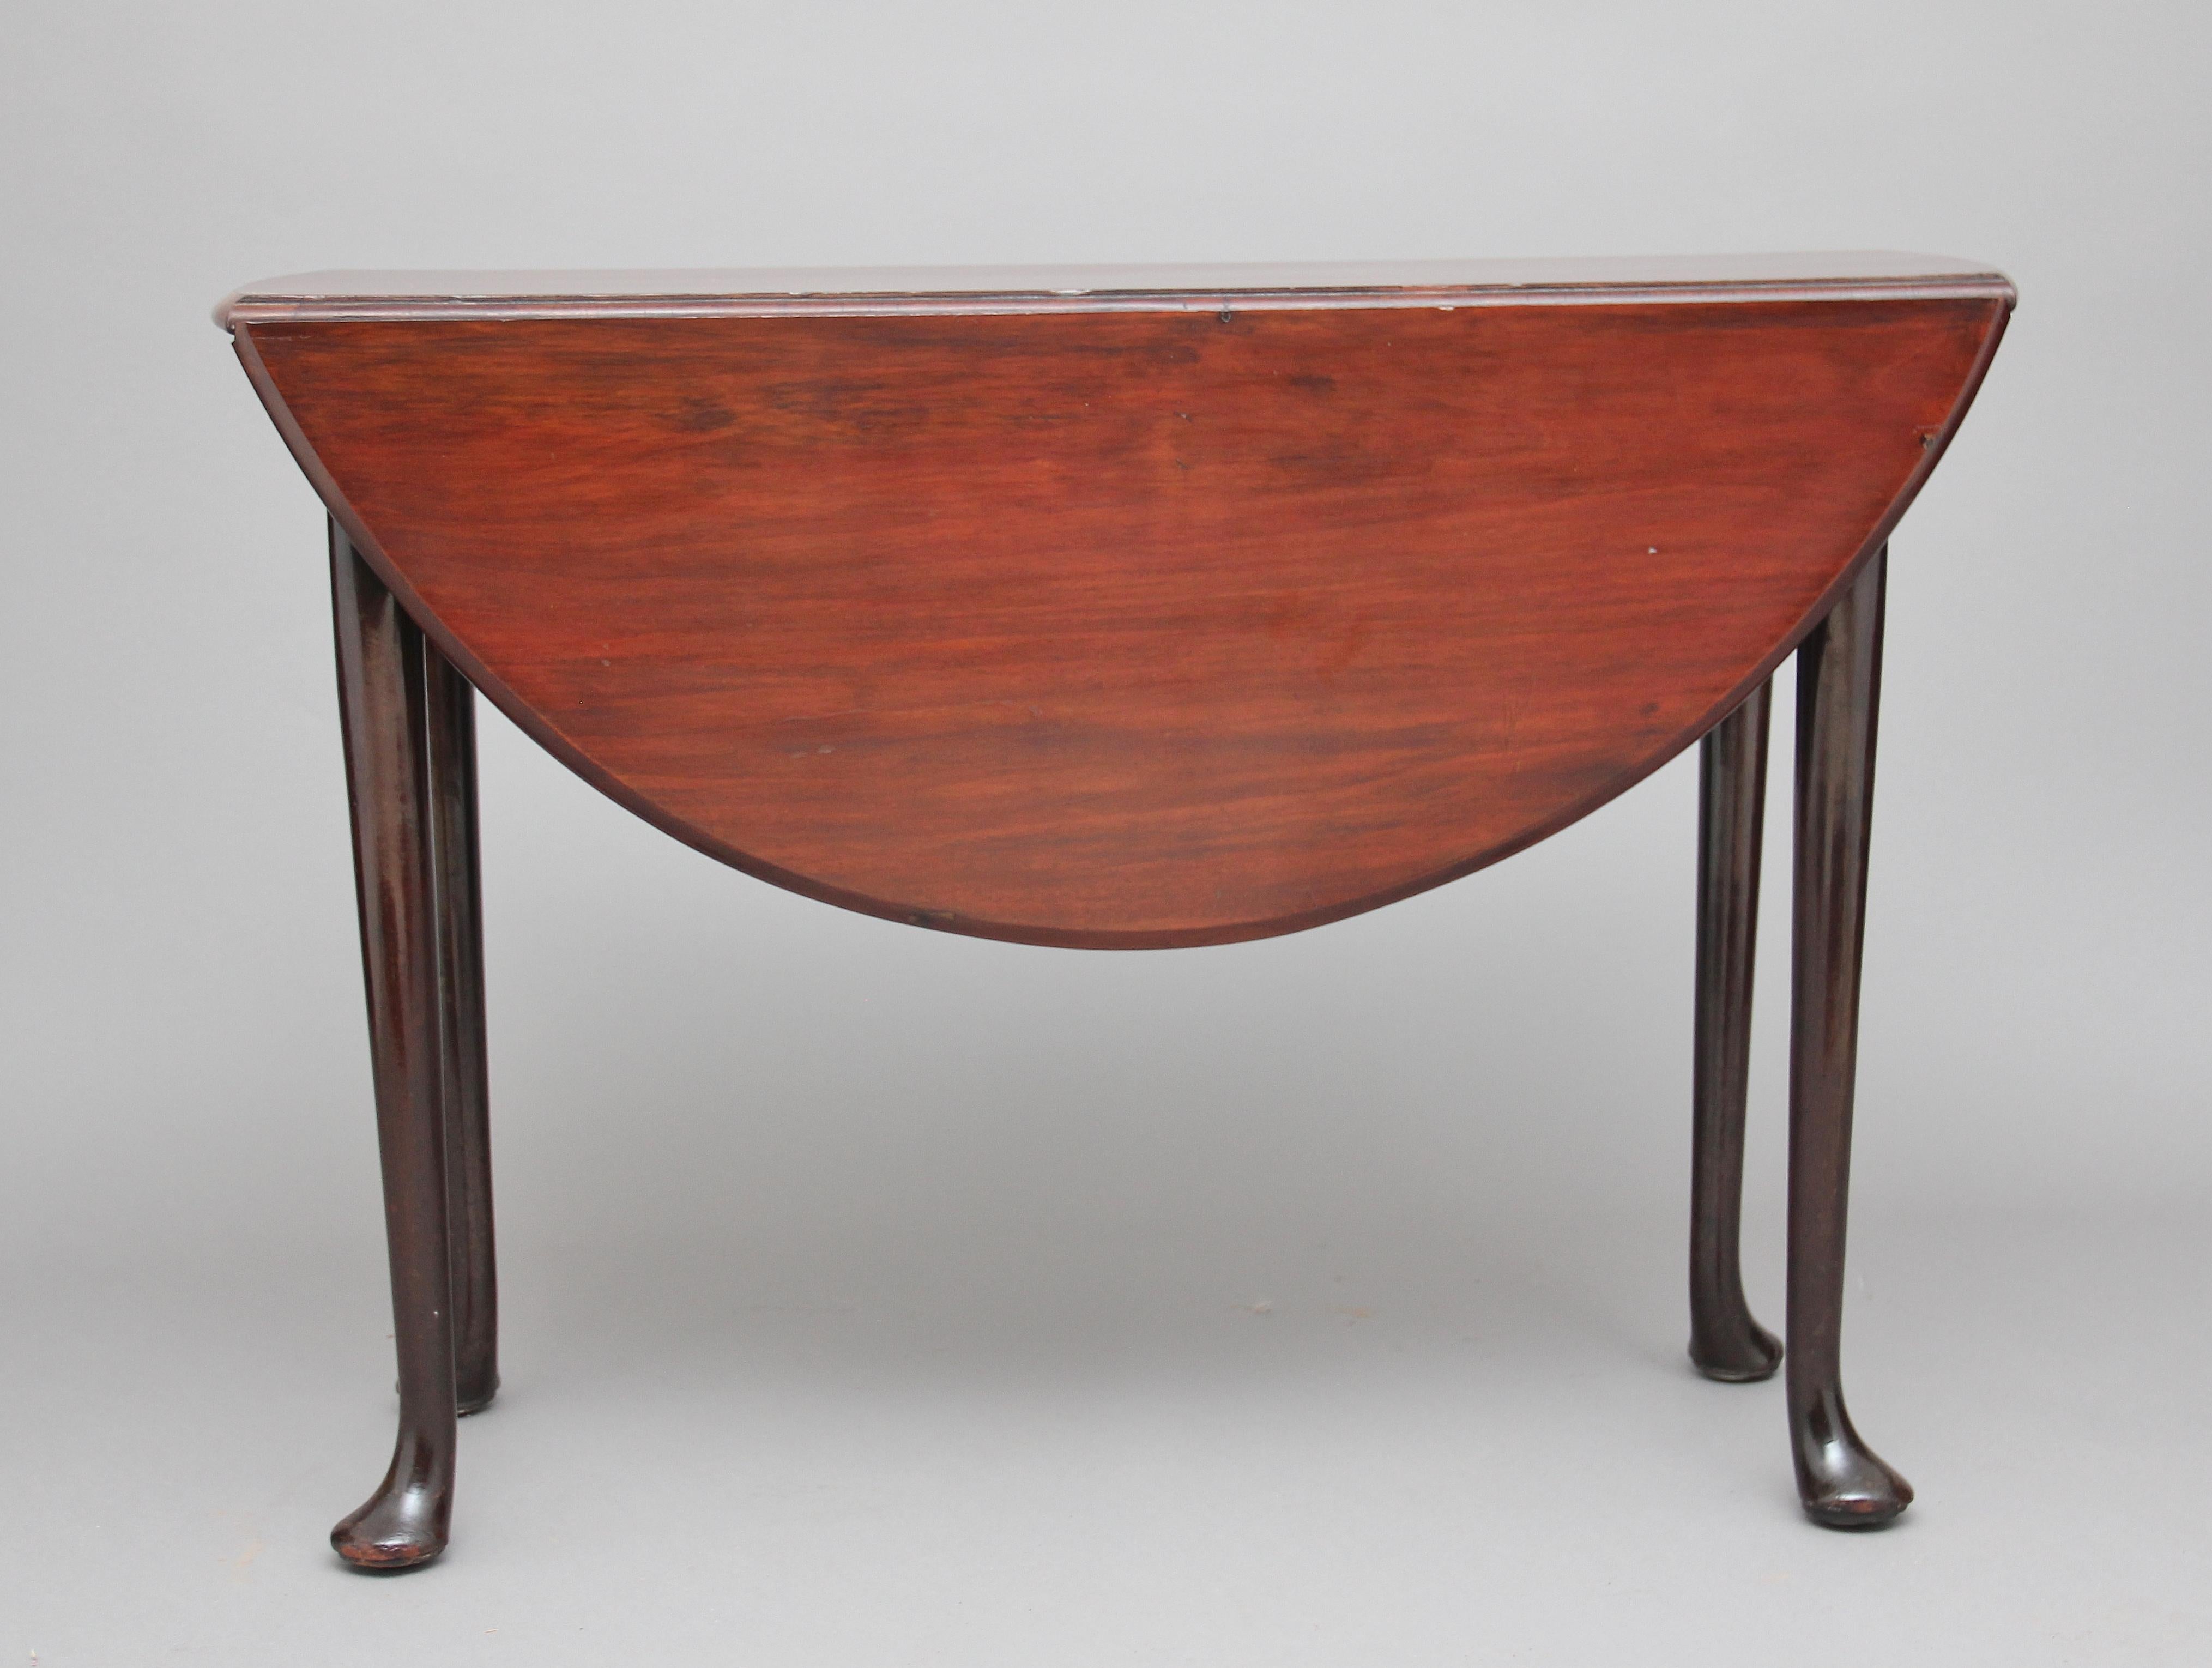 18th century Georgian mahogany drop-leaf table, with a solid top standing on turned legs with pad feet, circa 1790.